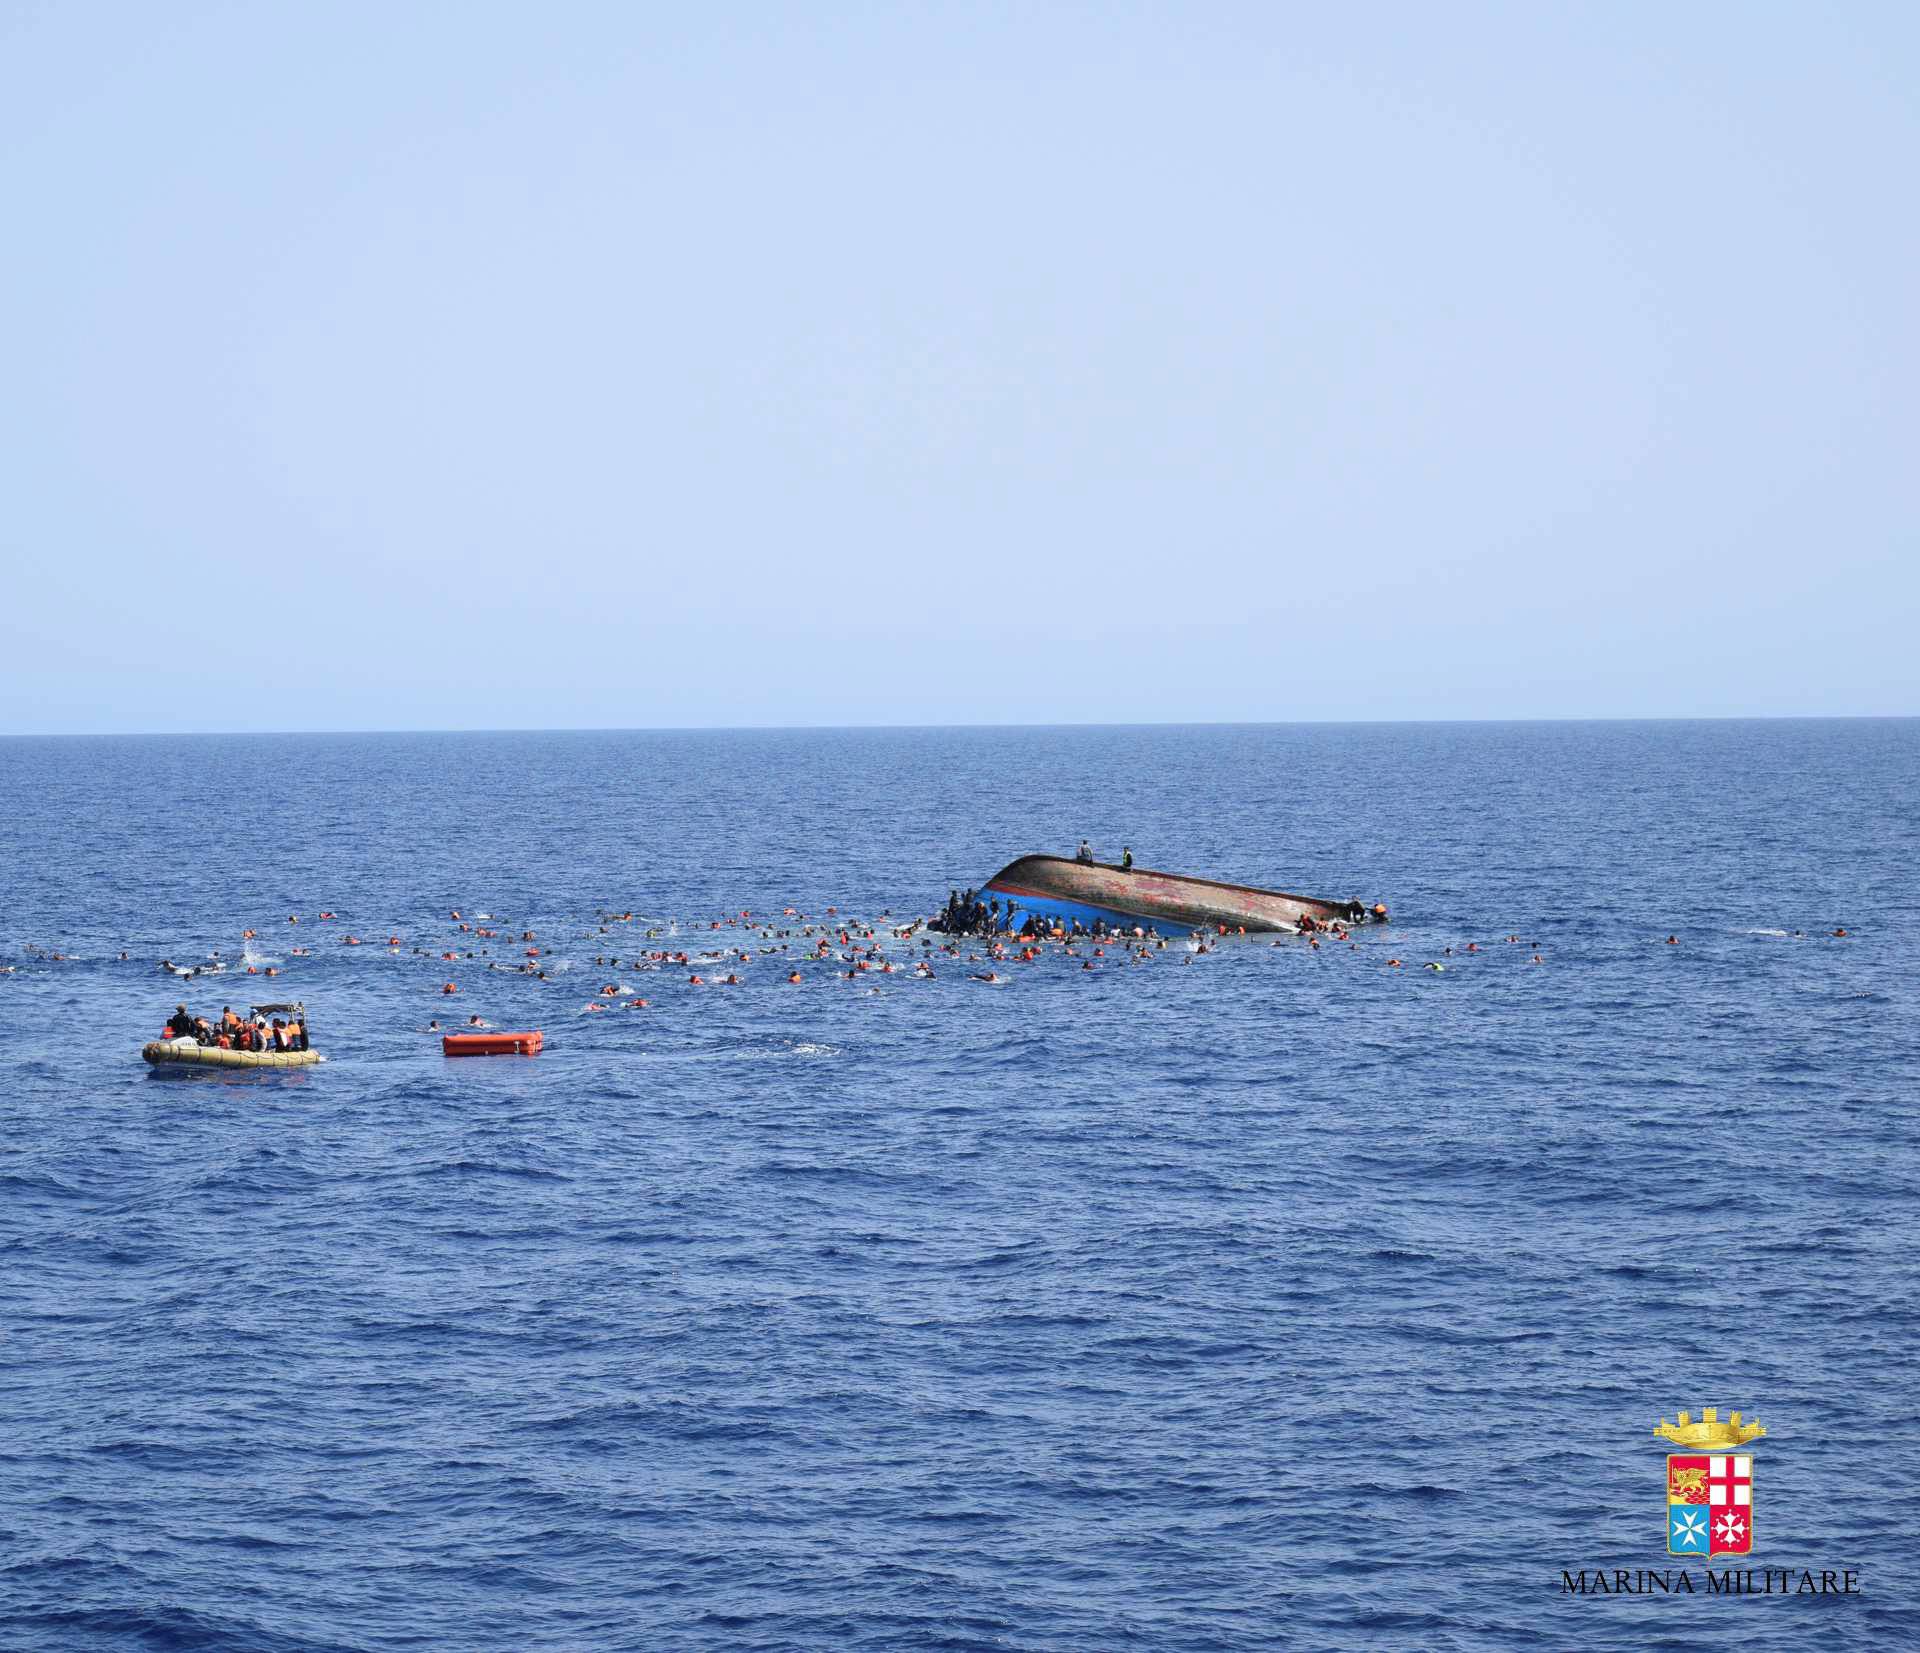 Migrants are rescued from a capsized boat during a rescue operation by Italian navy ships "Bettica" and "Bergamini" off the coast of Libya